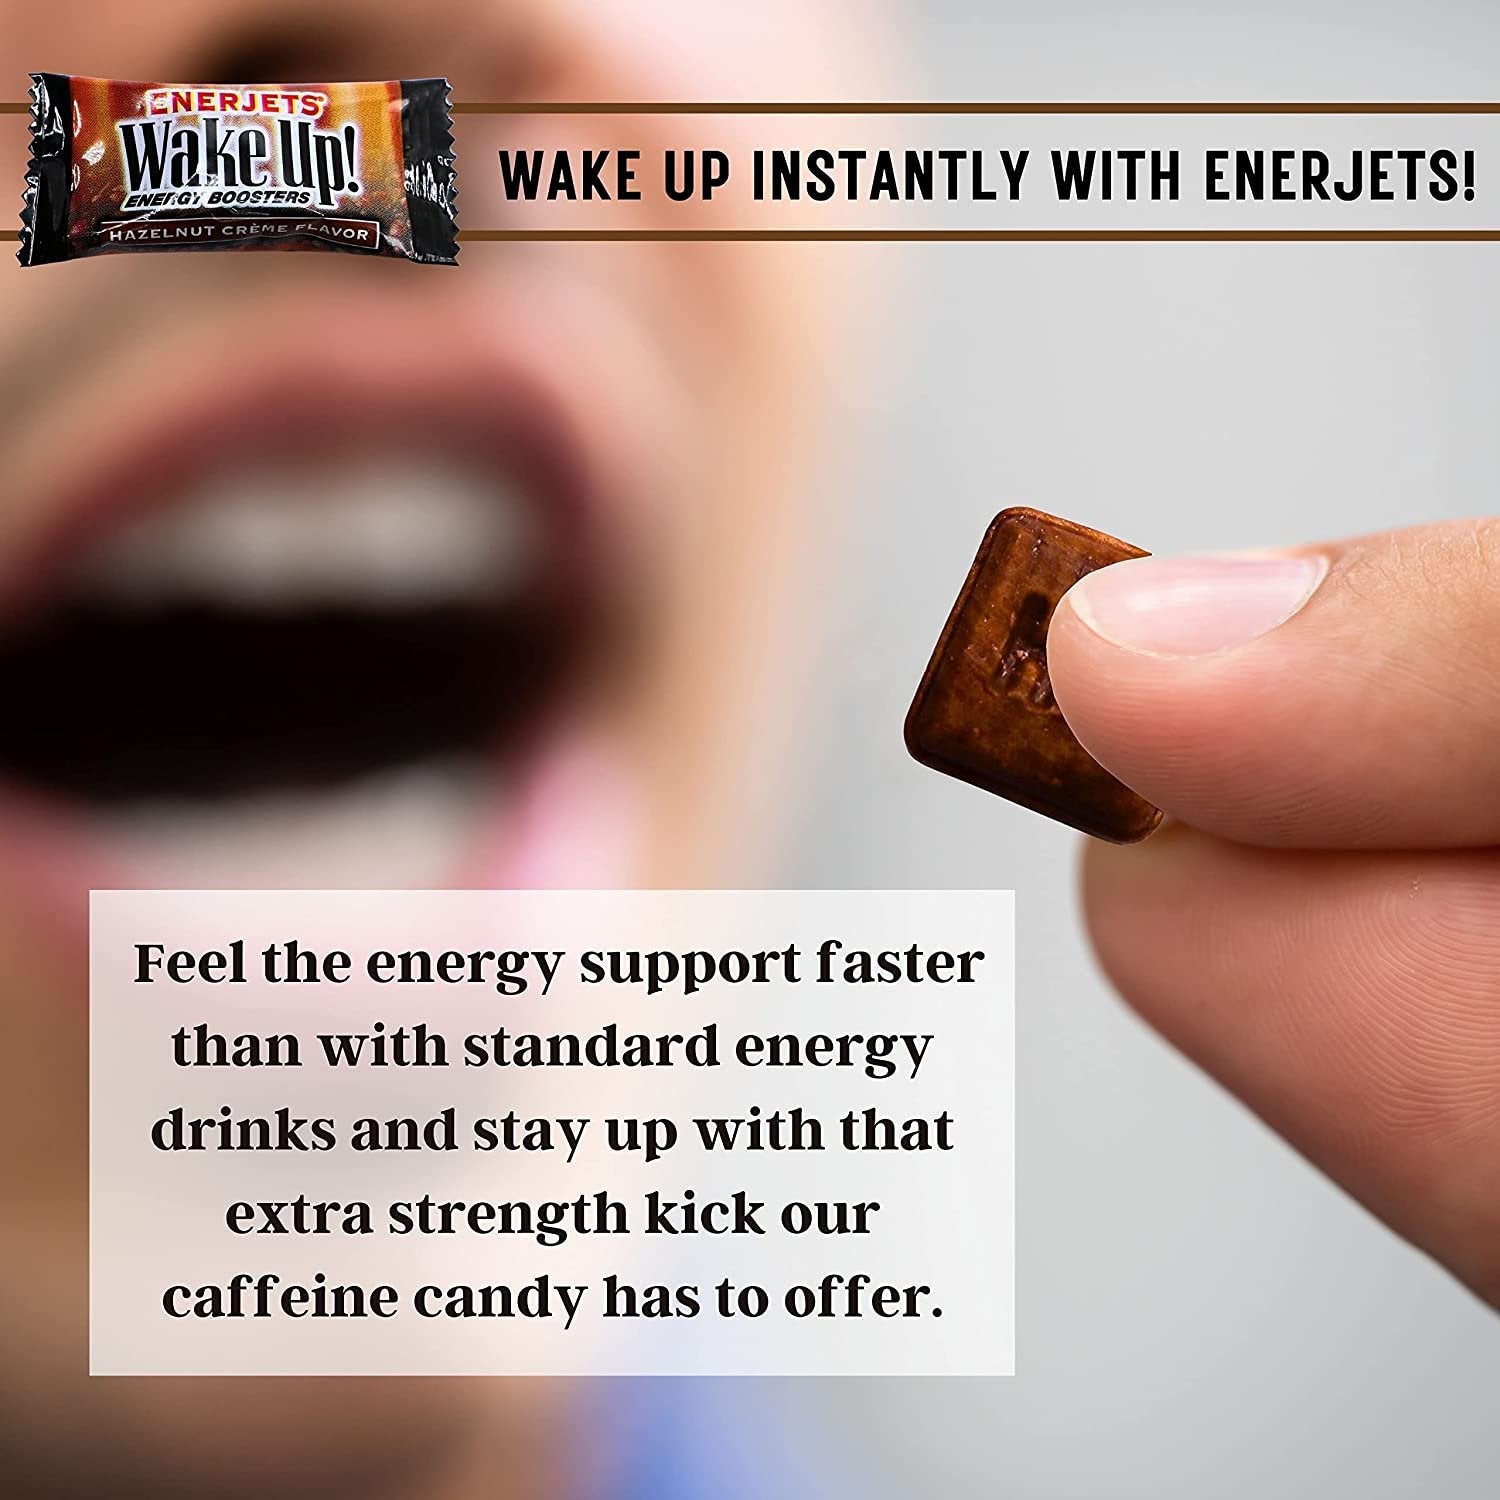 Enerjets Wake Up Energy Booster Caffeinated Drops - Instant Coffee Energy Supplements - Hazelnut Creme Flavor - Pack of 3, 12 Drops Per Package with Worldwide Nutrition Multi Purpose Key Chain